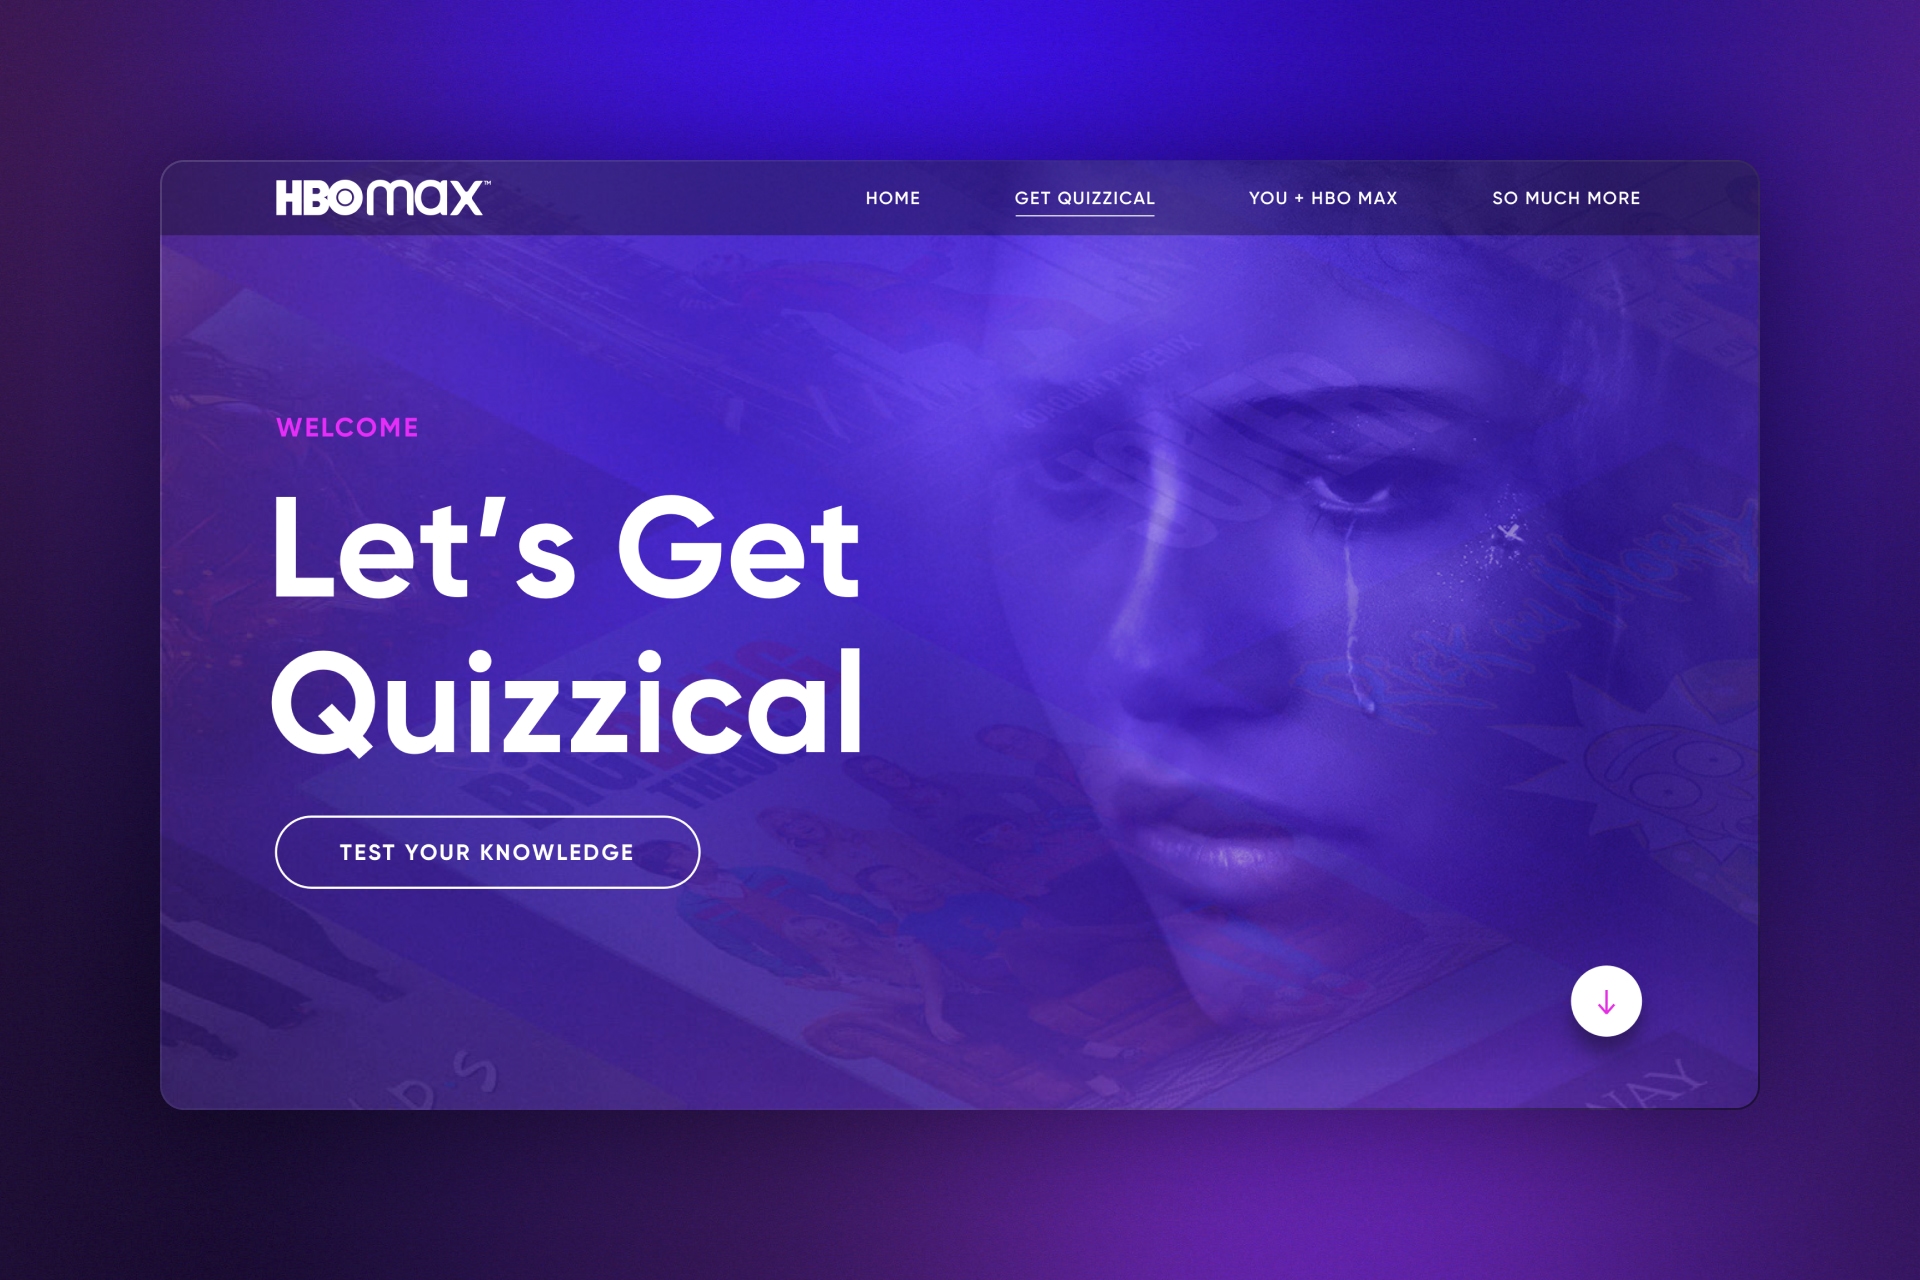 A screenshot of the landing page for HBO Max Trivia